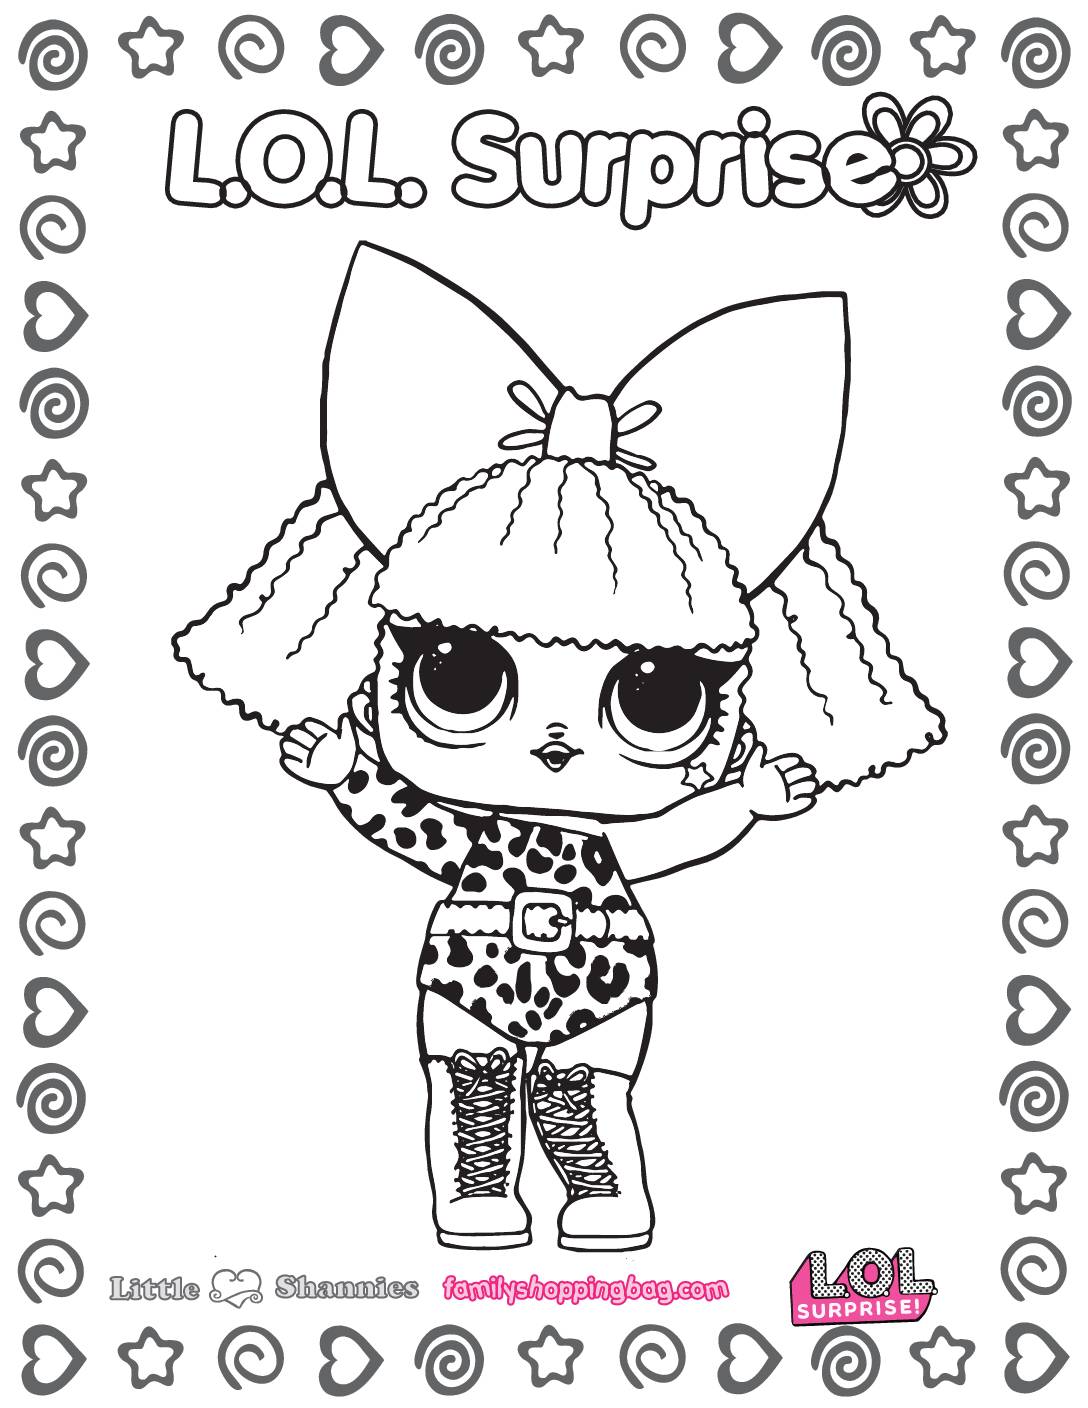 Lol Surprise Coloring Page 5 Coloring Pages